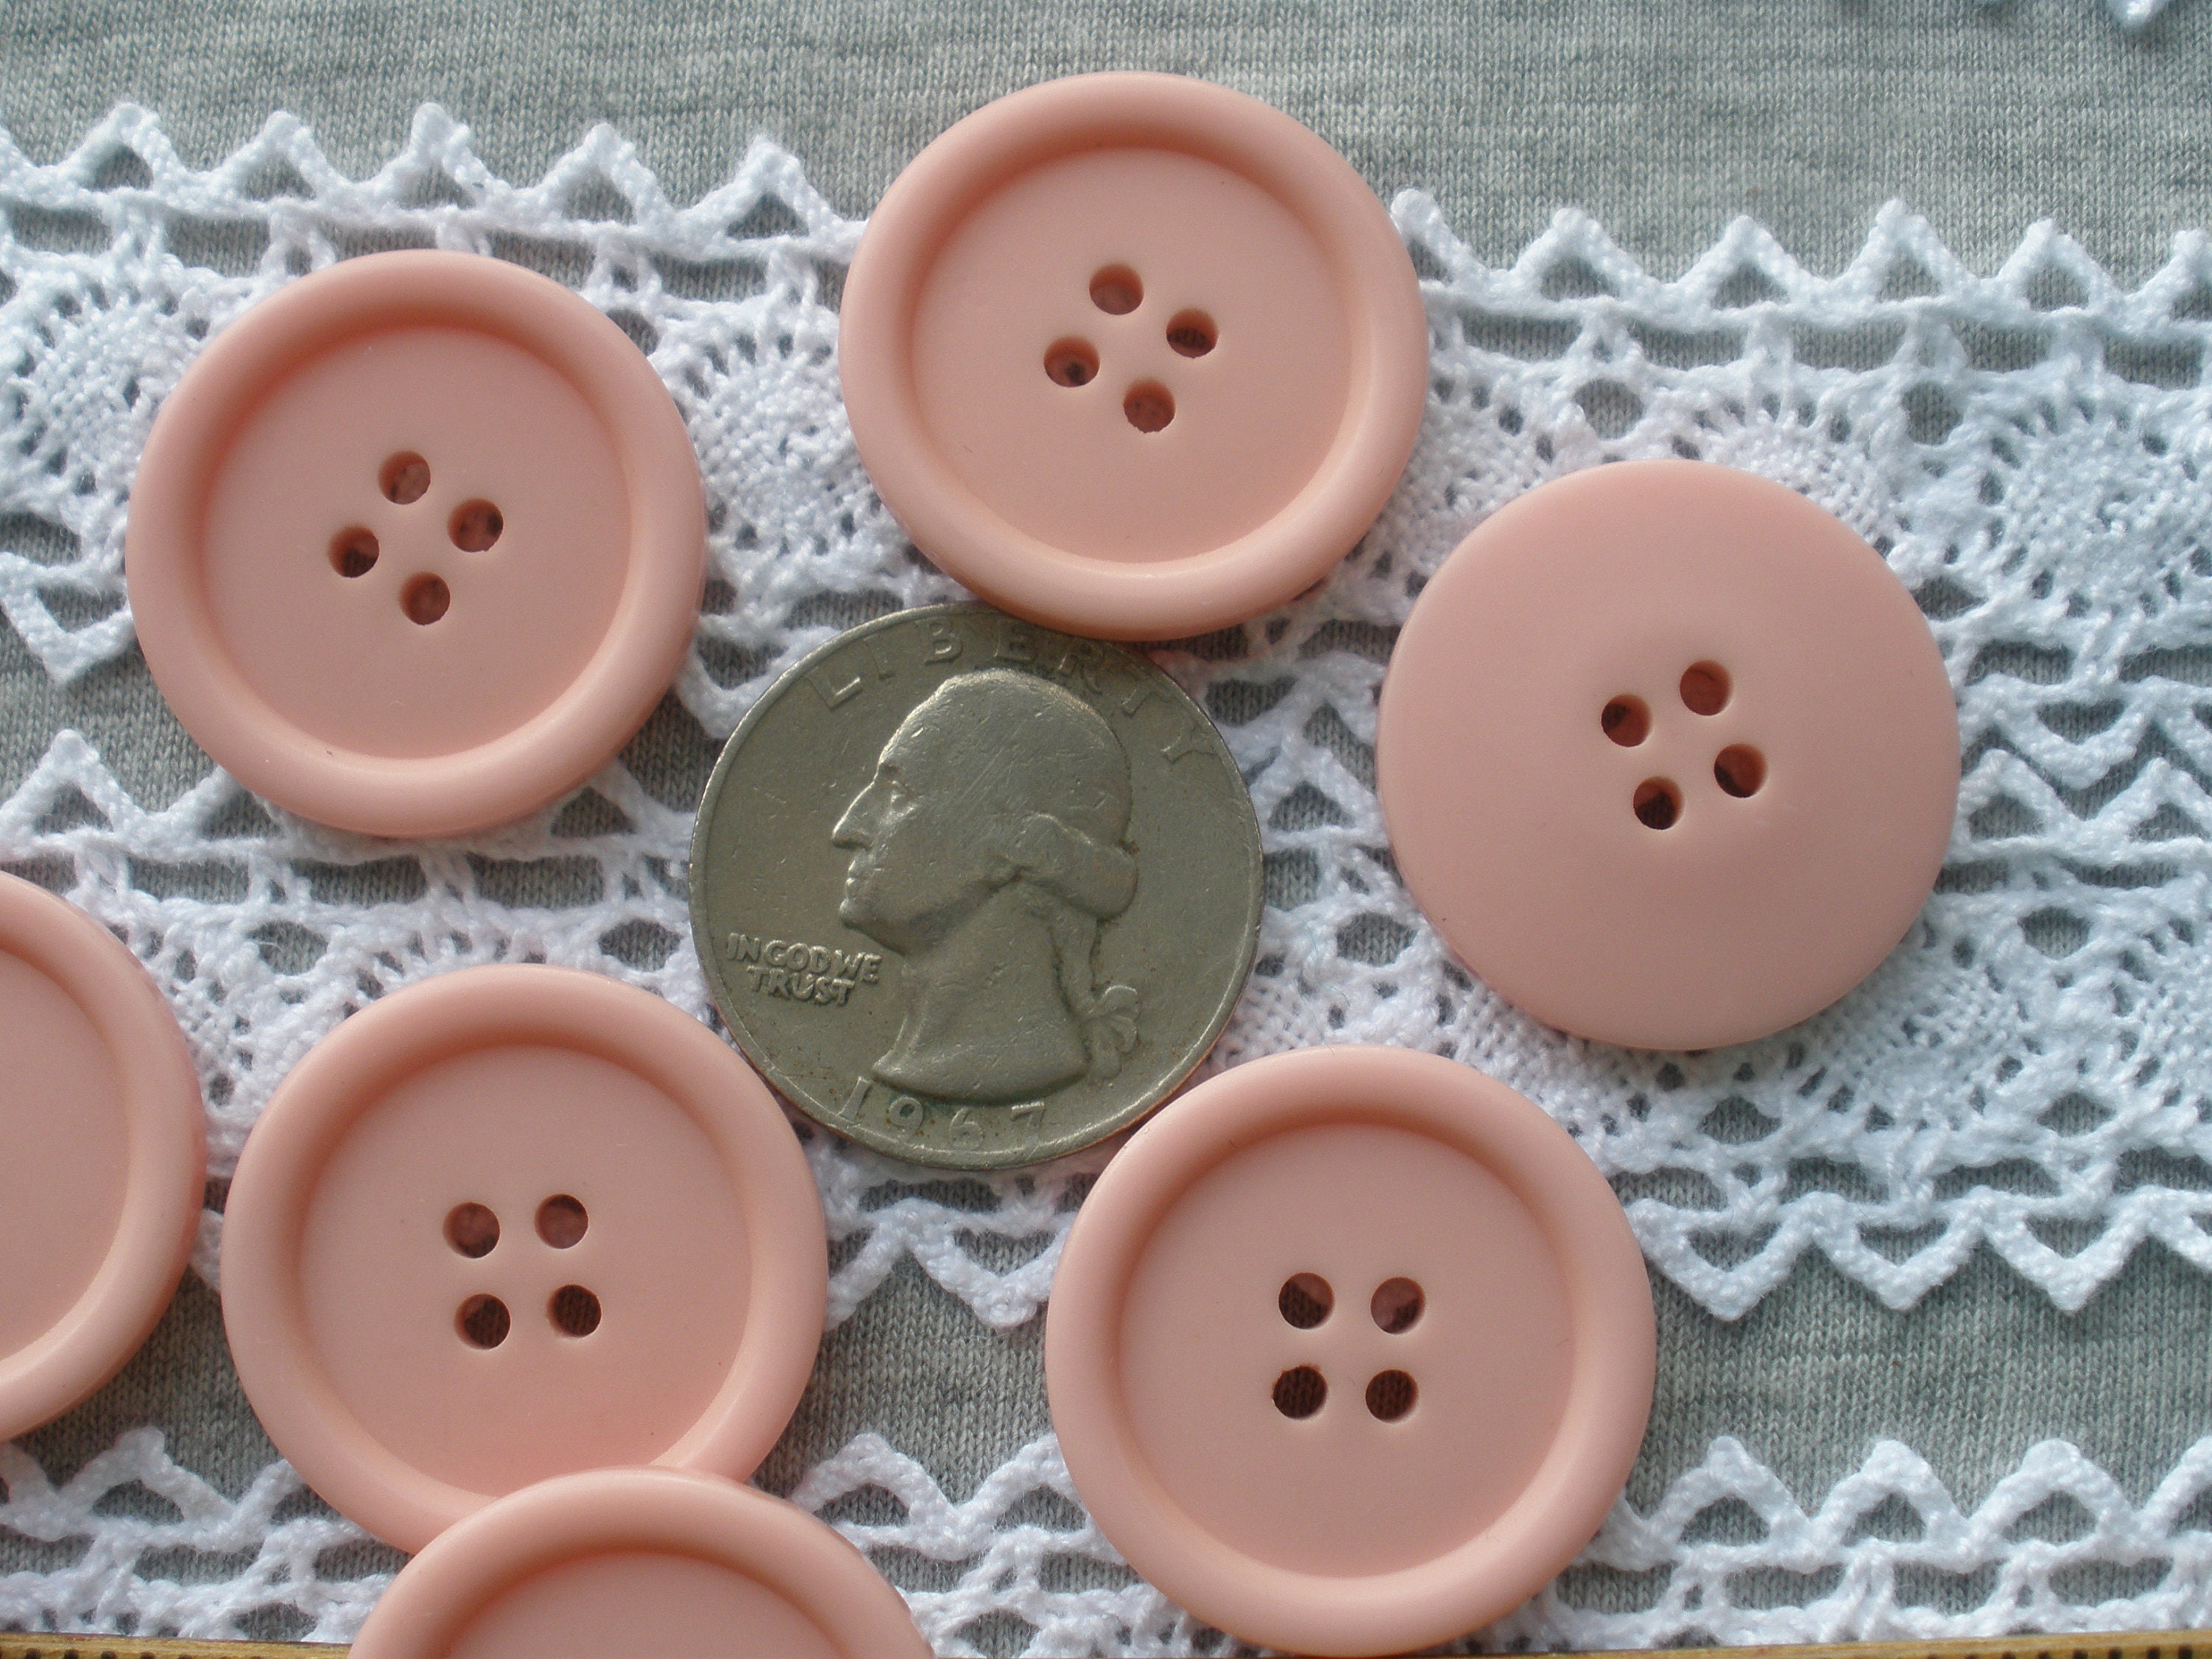 30PC Hot Pink Flat Round 4 Holes Resin Buttons, 30x3mm( 1-3/16x1/8 Inch)